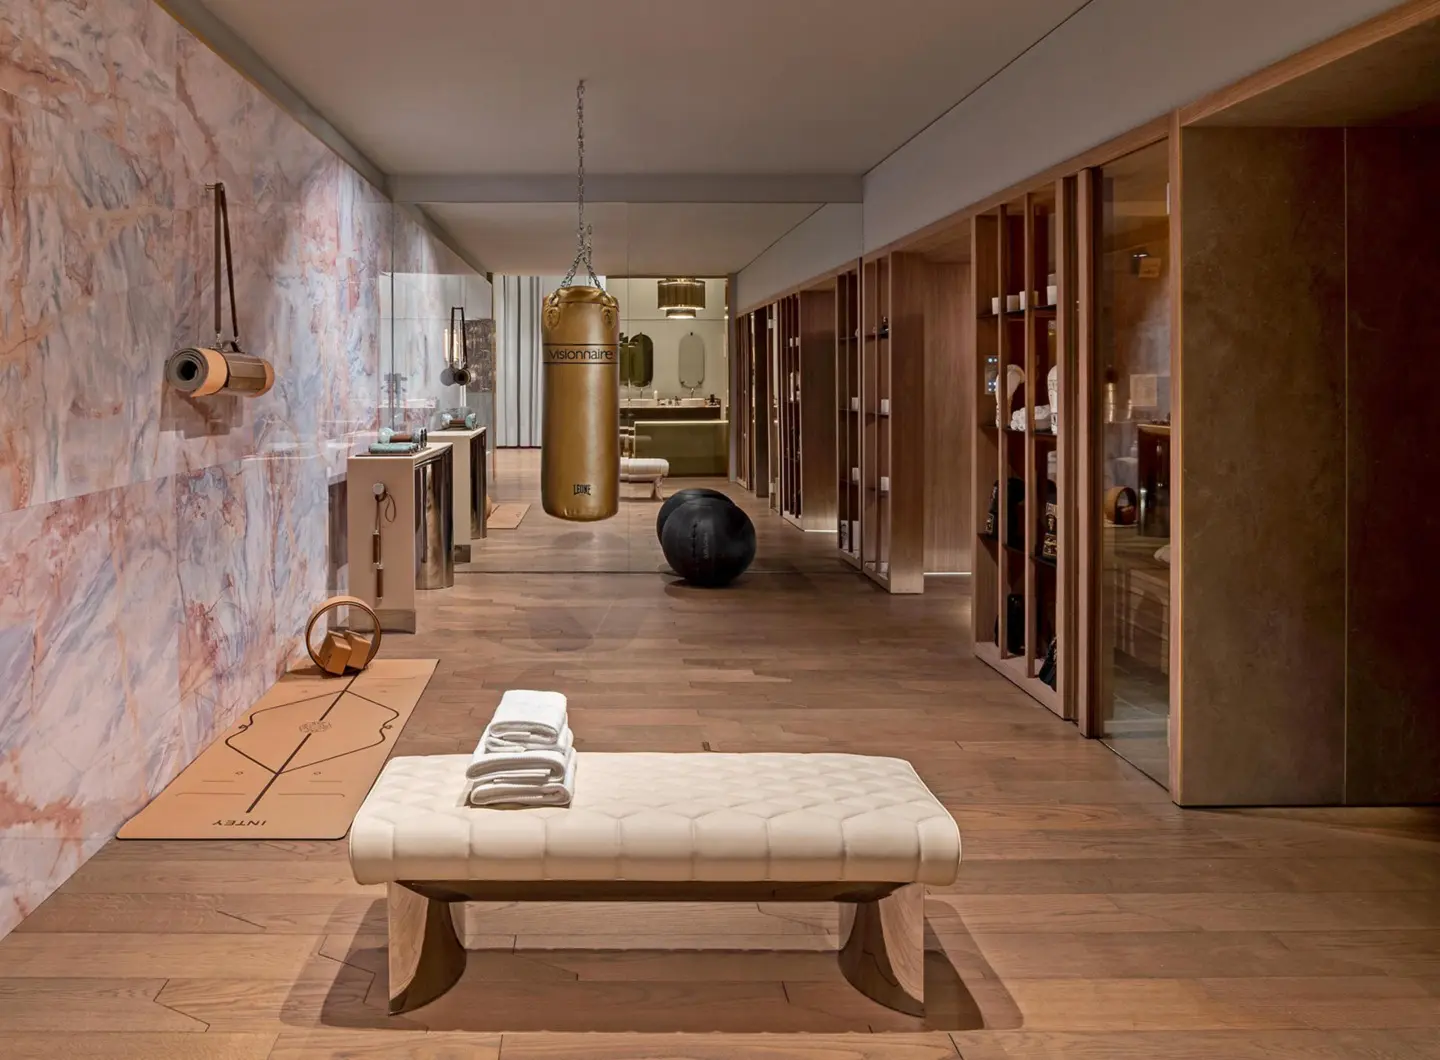 Kloster Fitness Collection by Alessandro La Spada